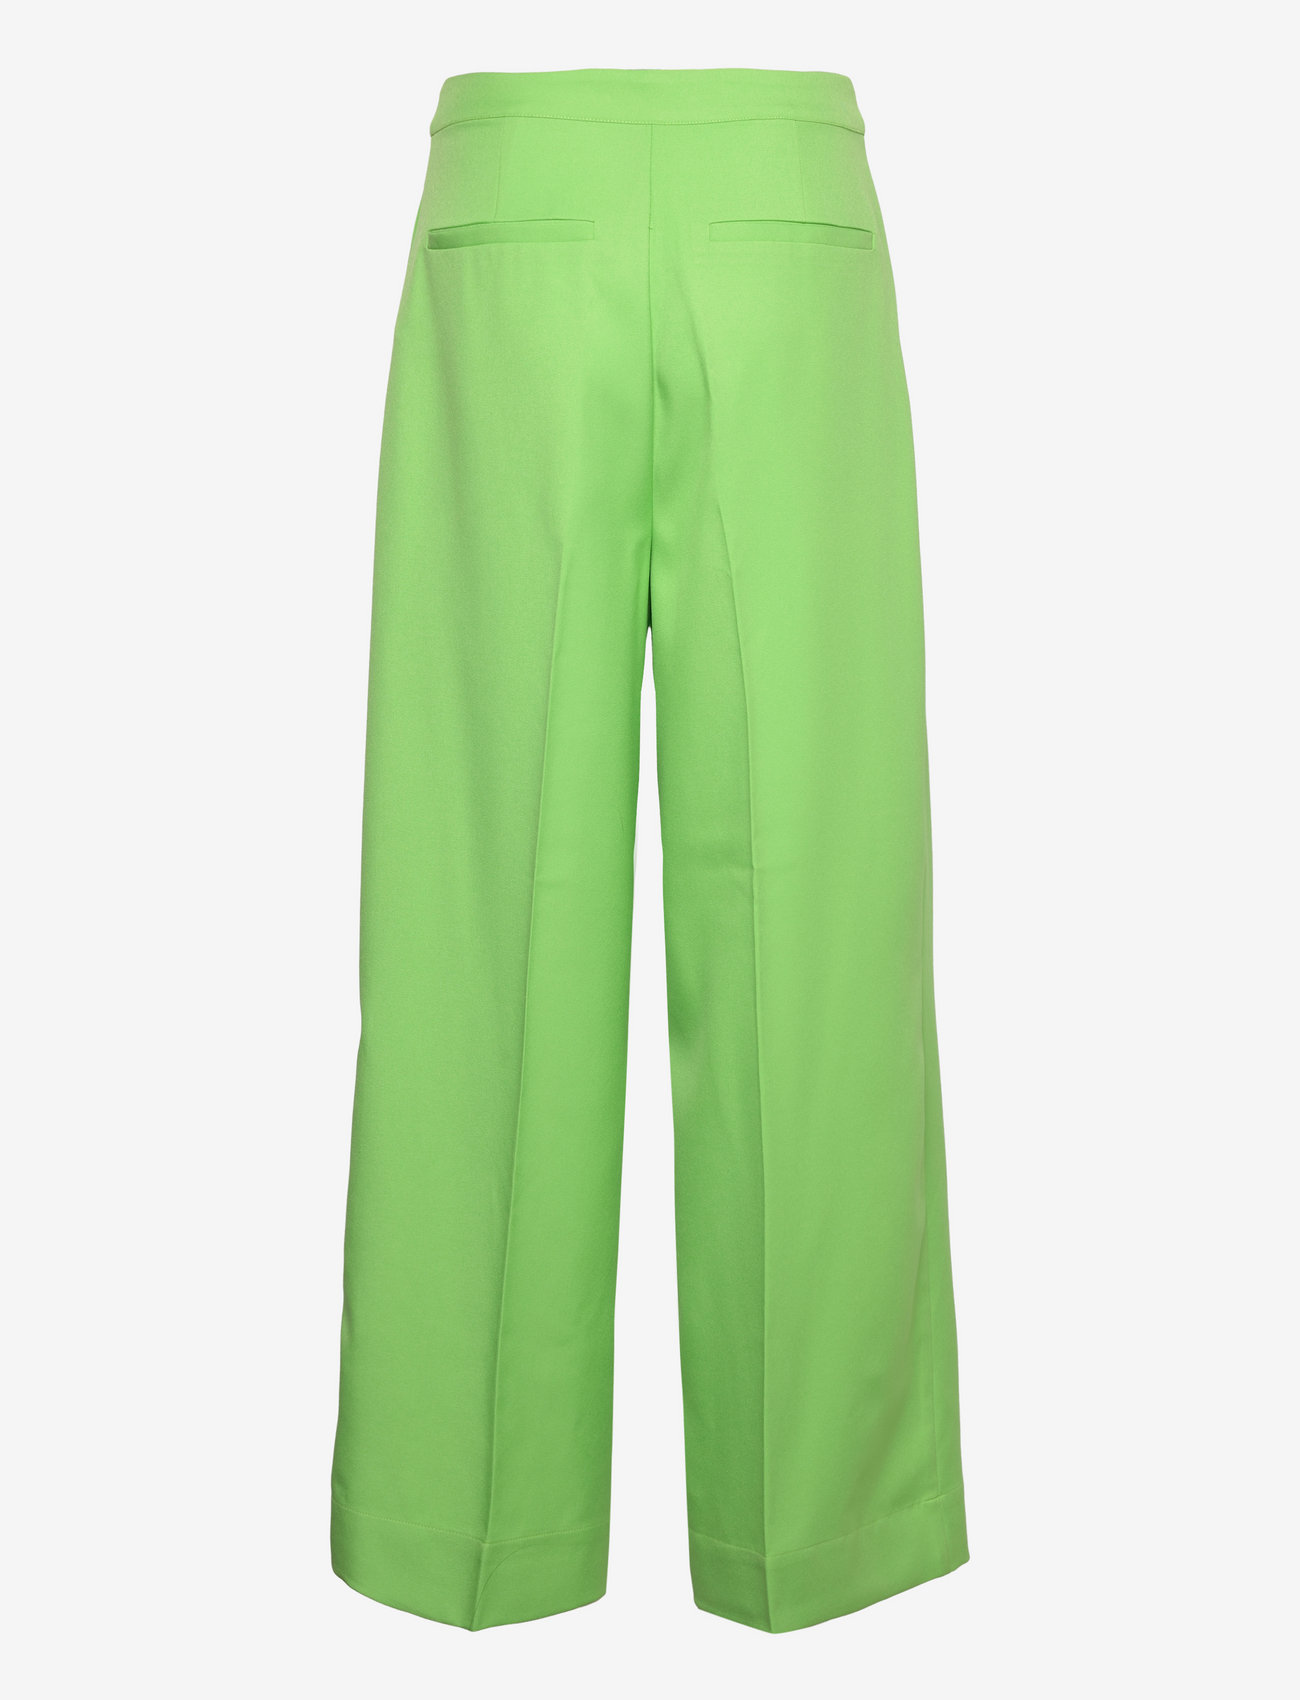 bzr - VibeBZWilde pants - tailored trousers - lime - 1